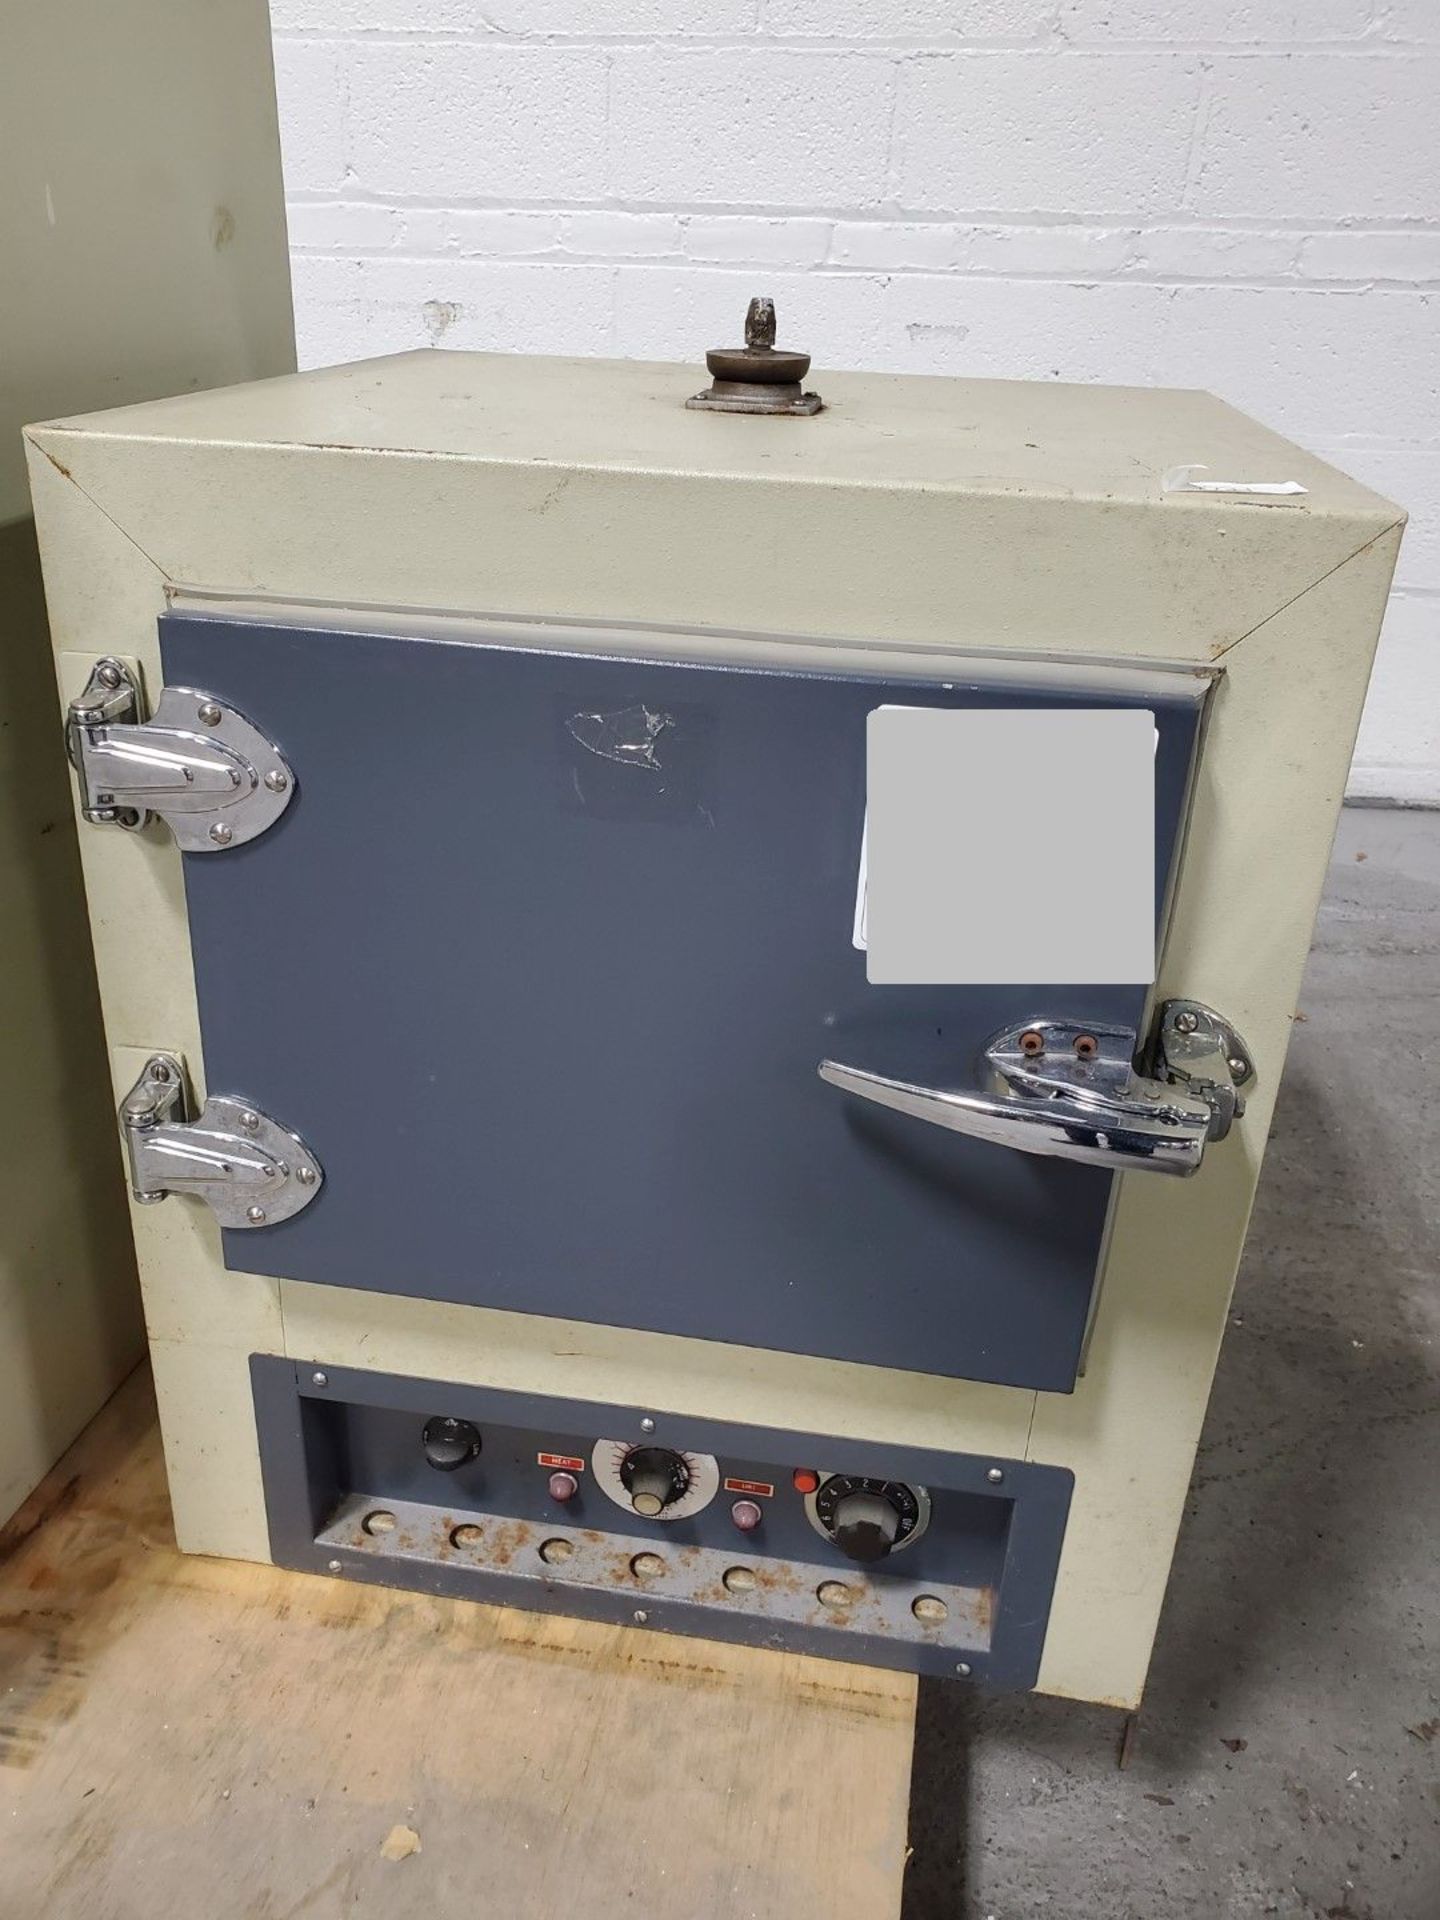 Hotpack Convection Oven, Model 213030